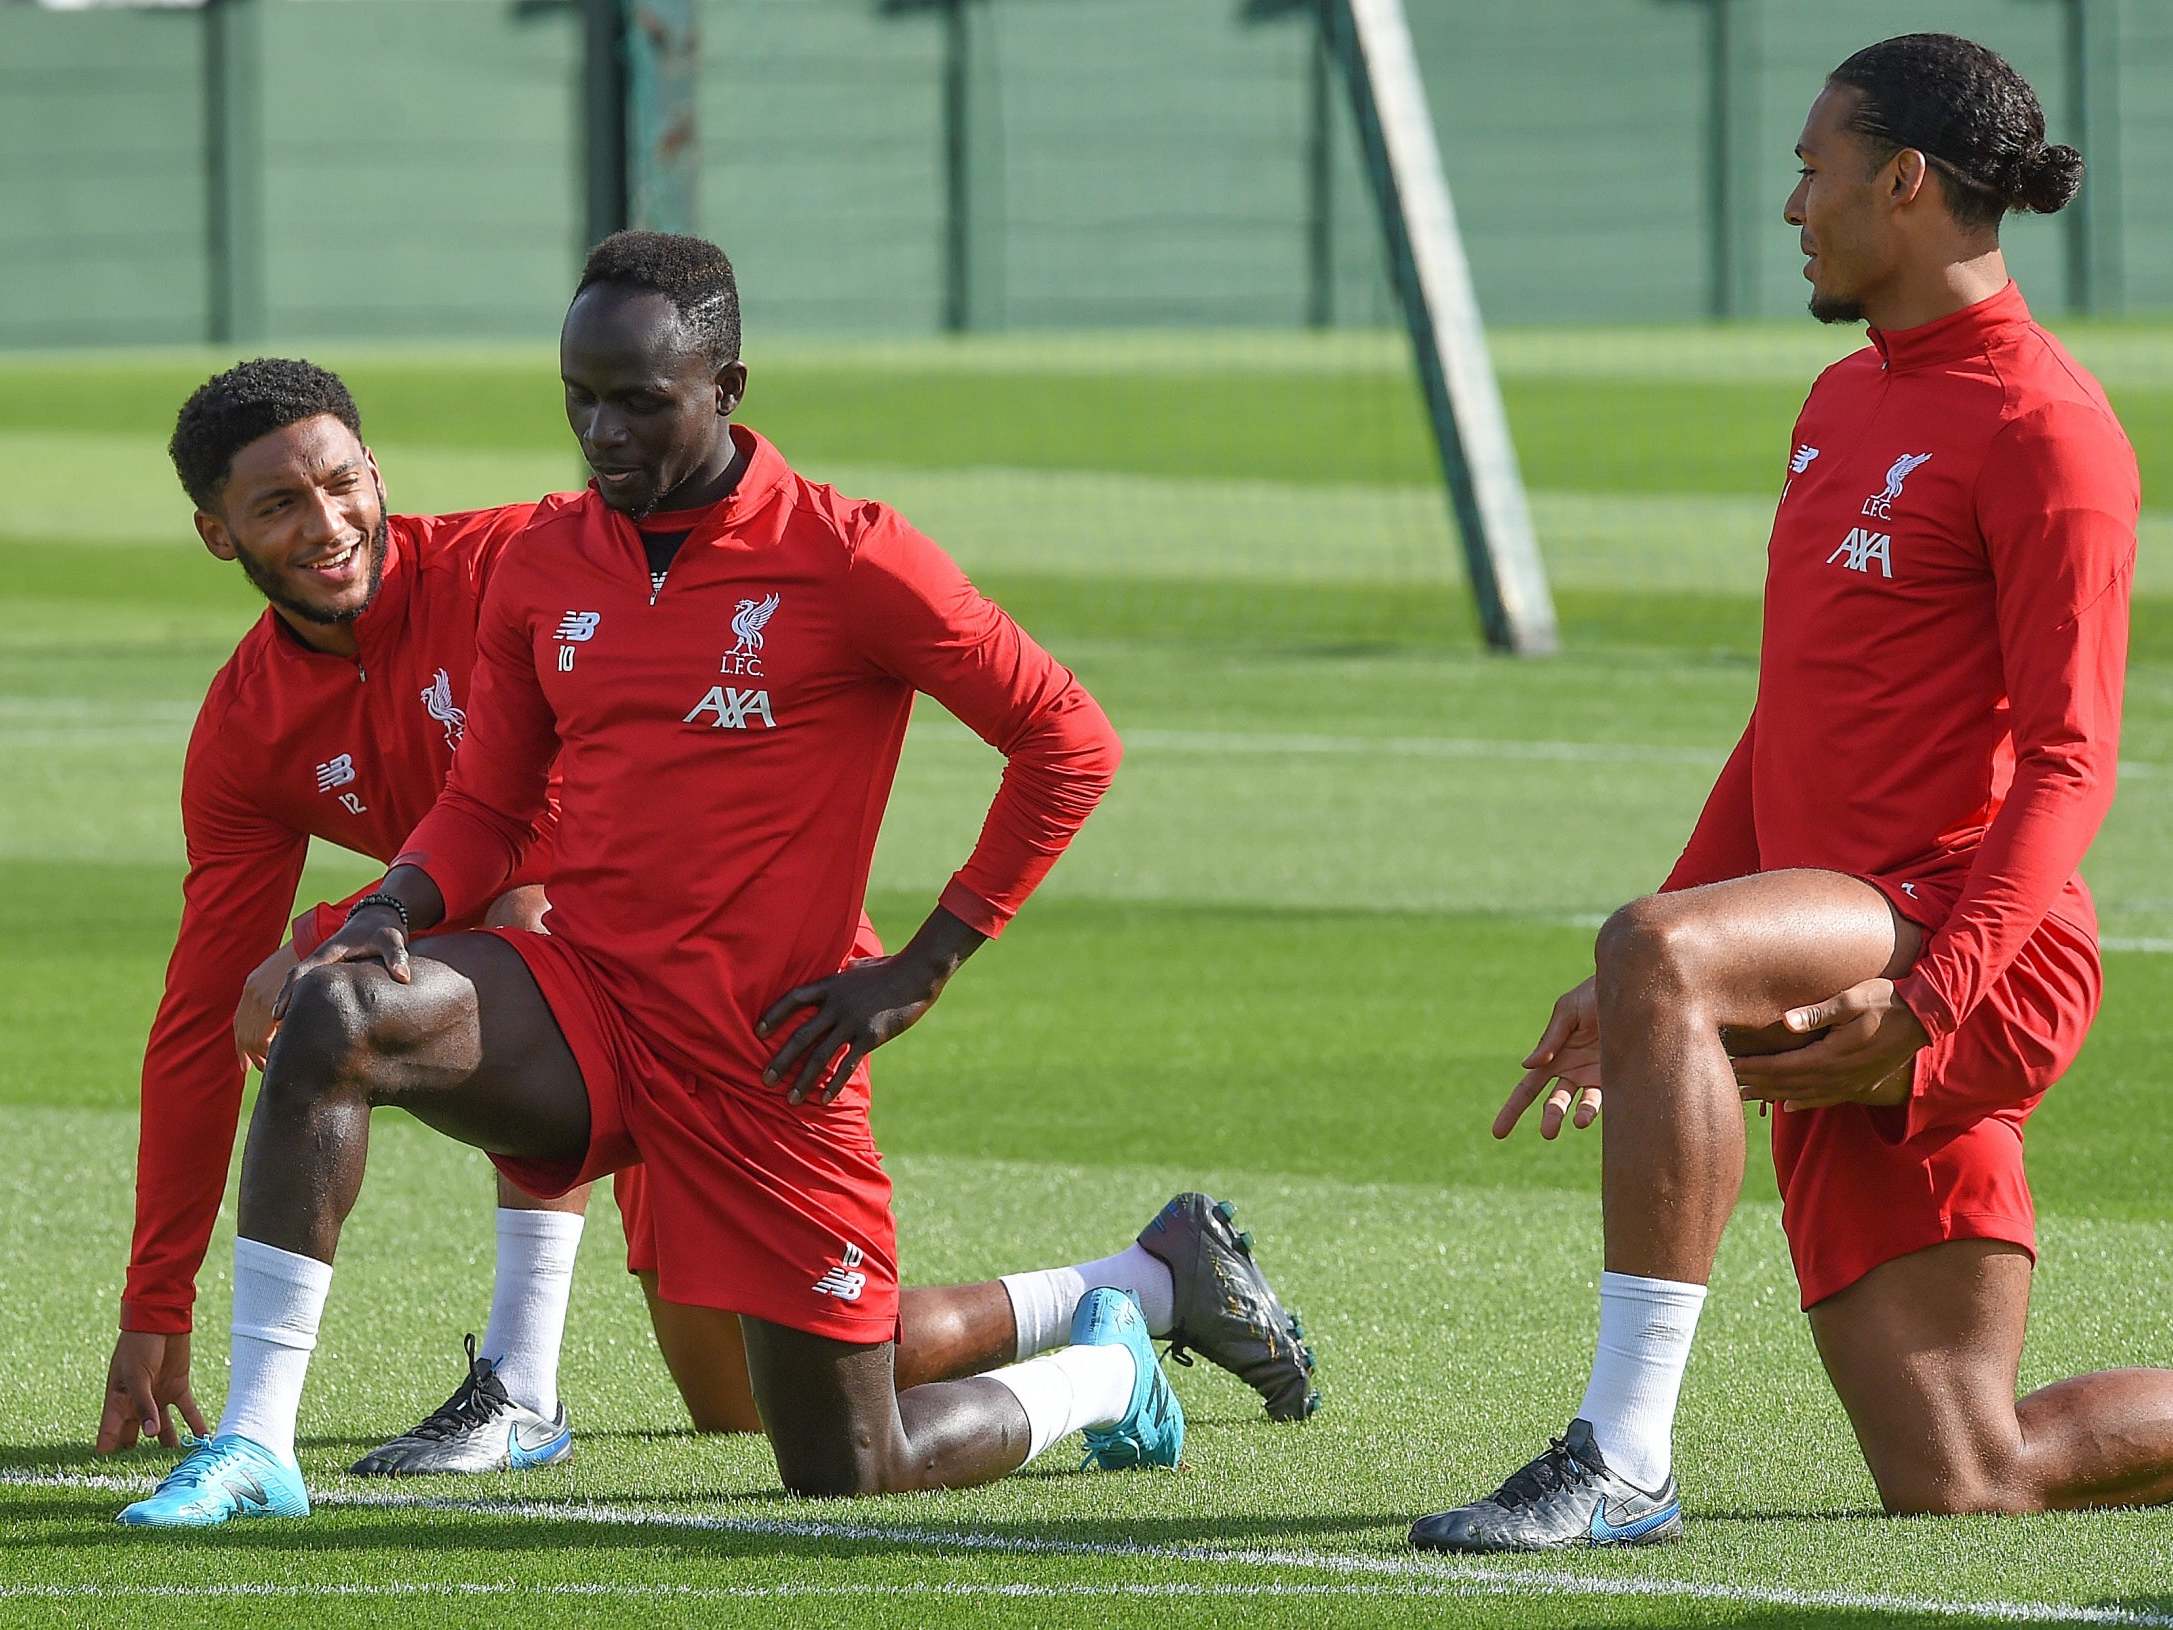 Mane returned to Liverpool training on Tuesday